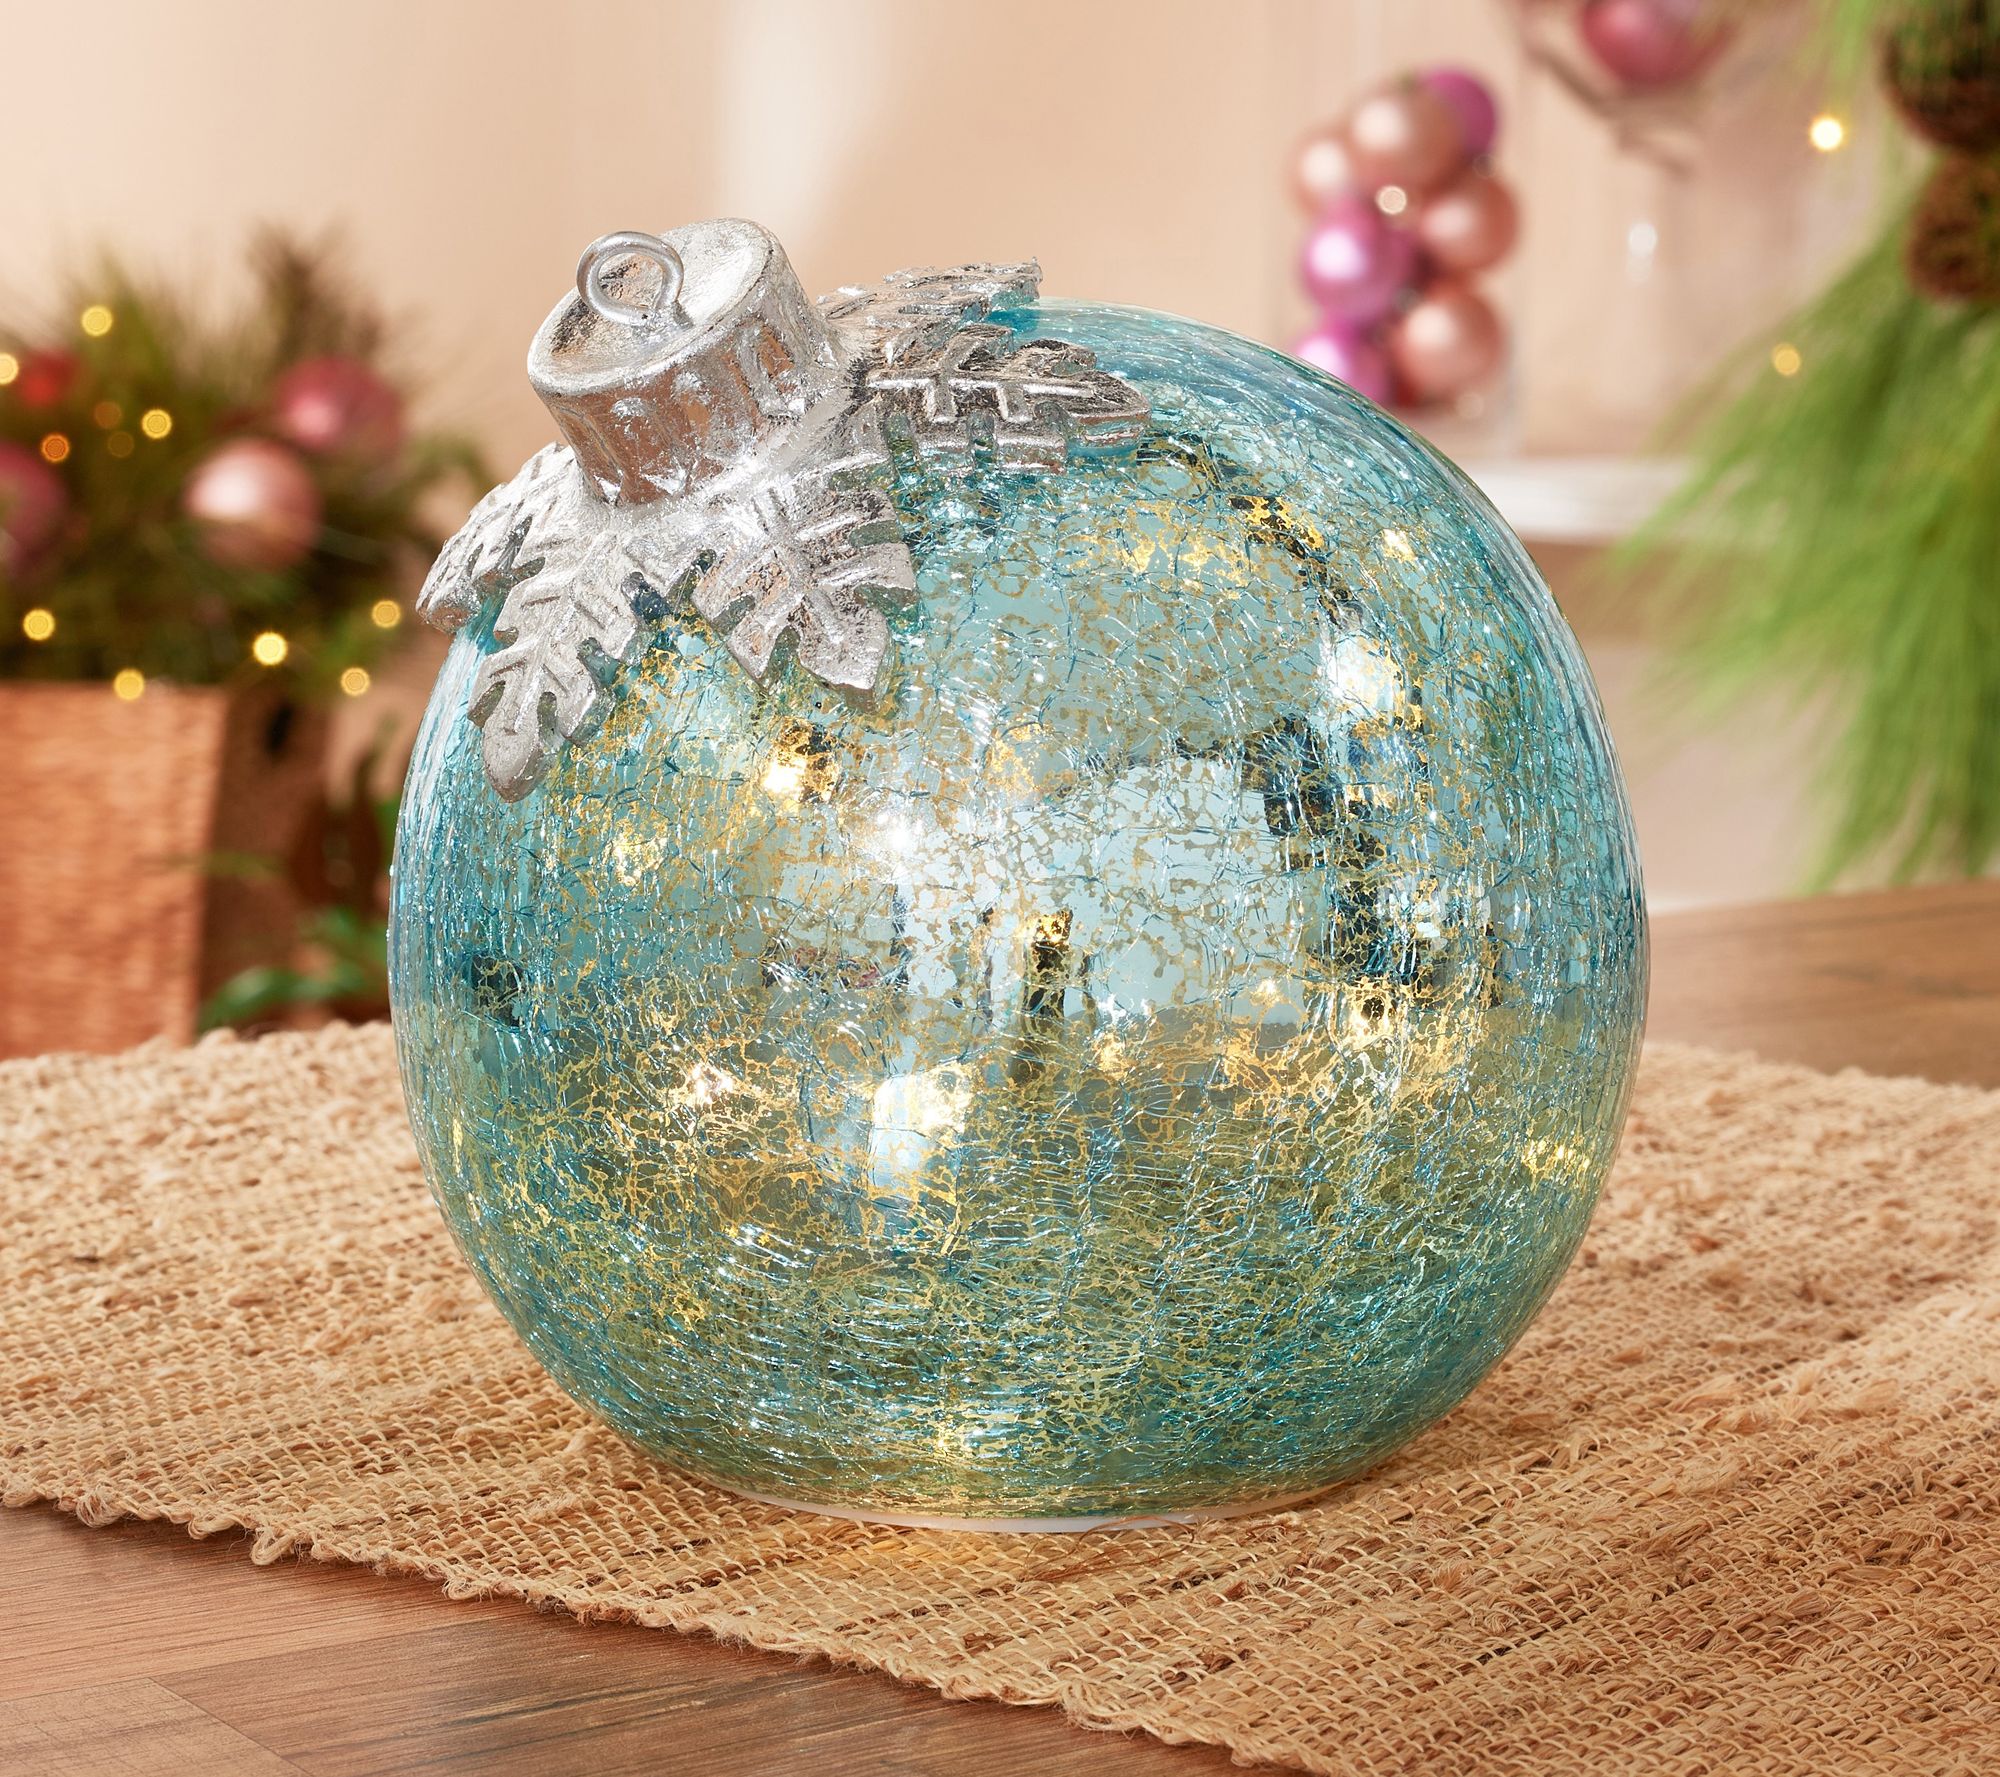 Details about   Illuminated 6" Glass Holiday Ornament by Valerie 